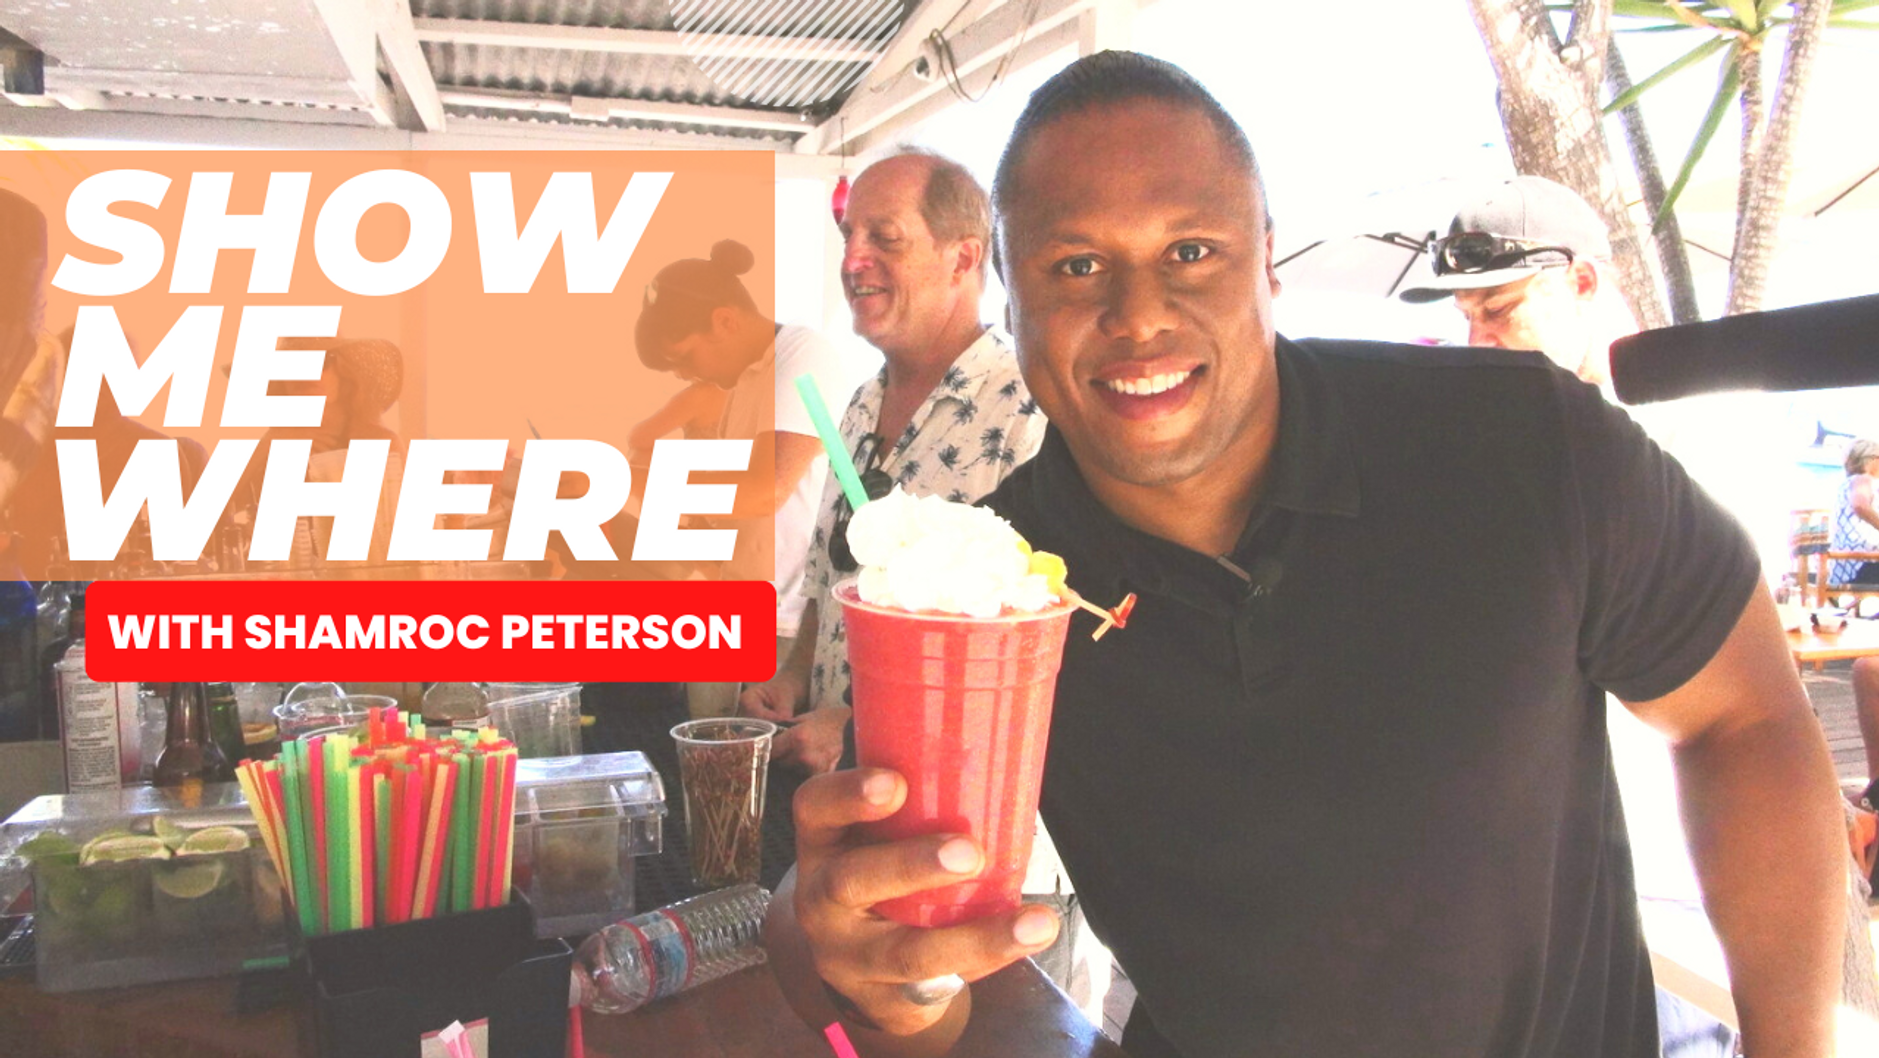 Show Me Where with Shamroc Peterson